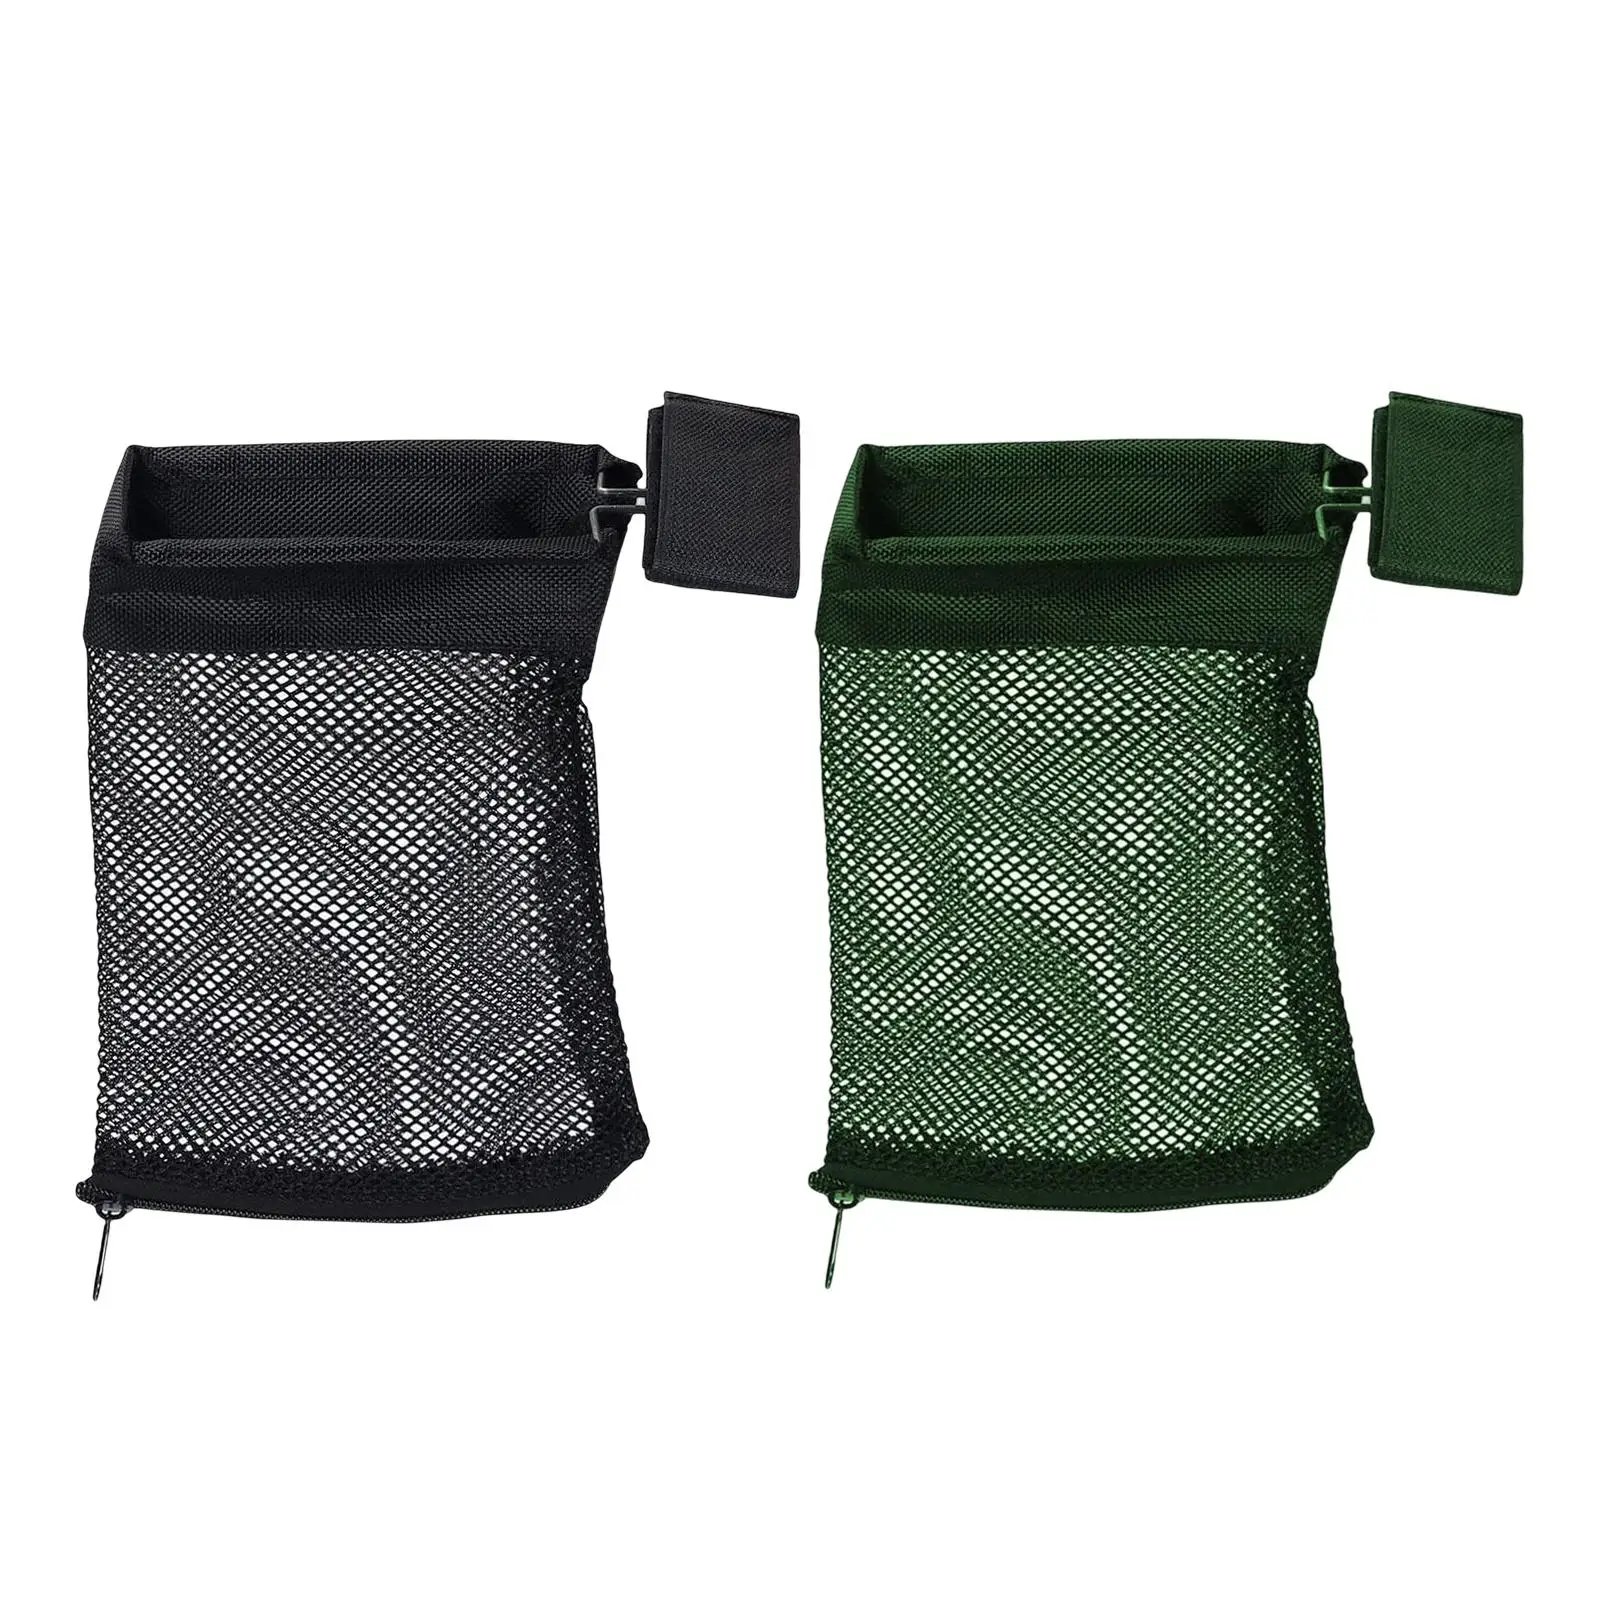 Net Recycling Bag Toiletry Pouch Collection With Zipper Organization Portable Storage Bag for Outdoor Office Hiking Home